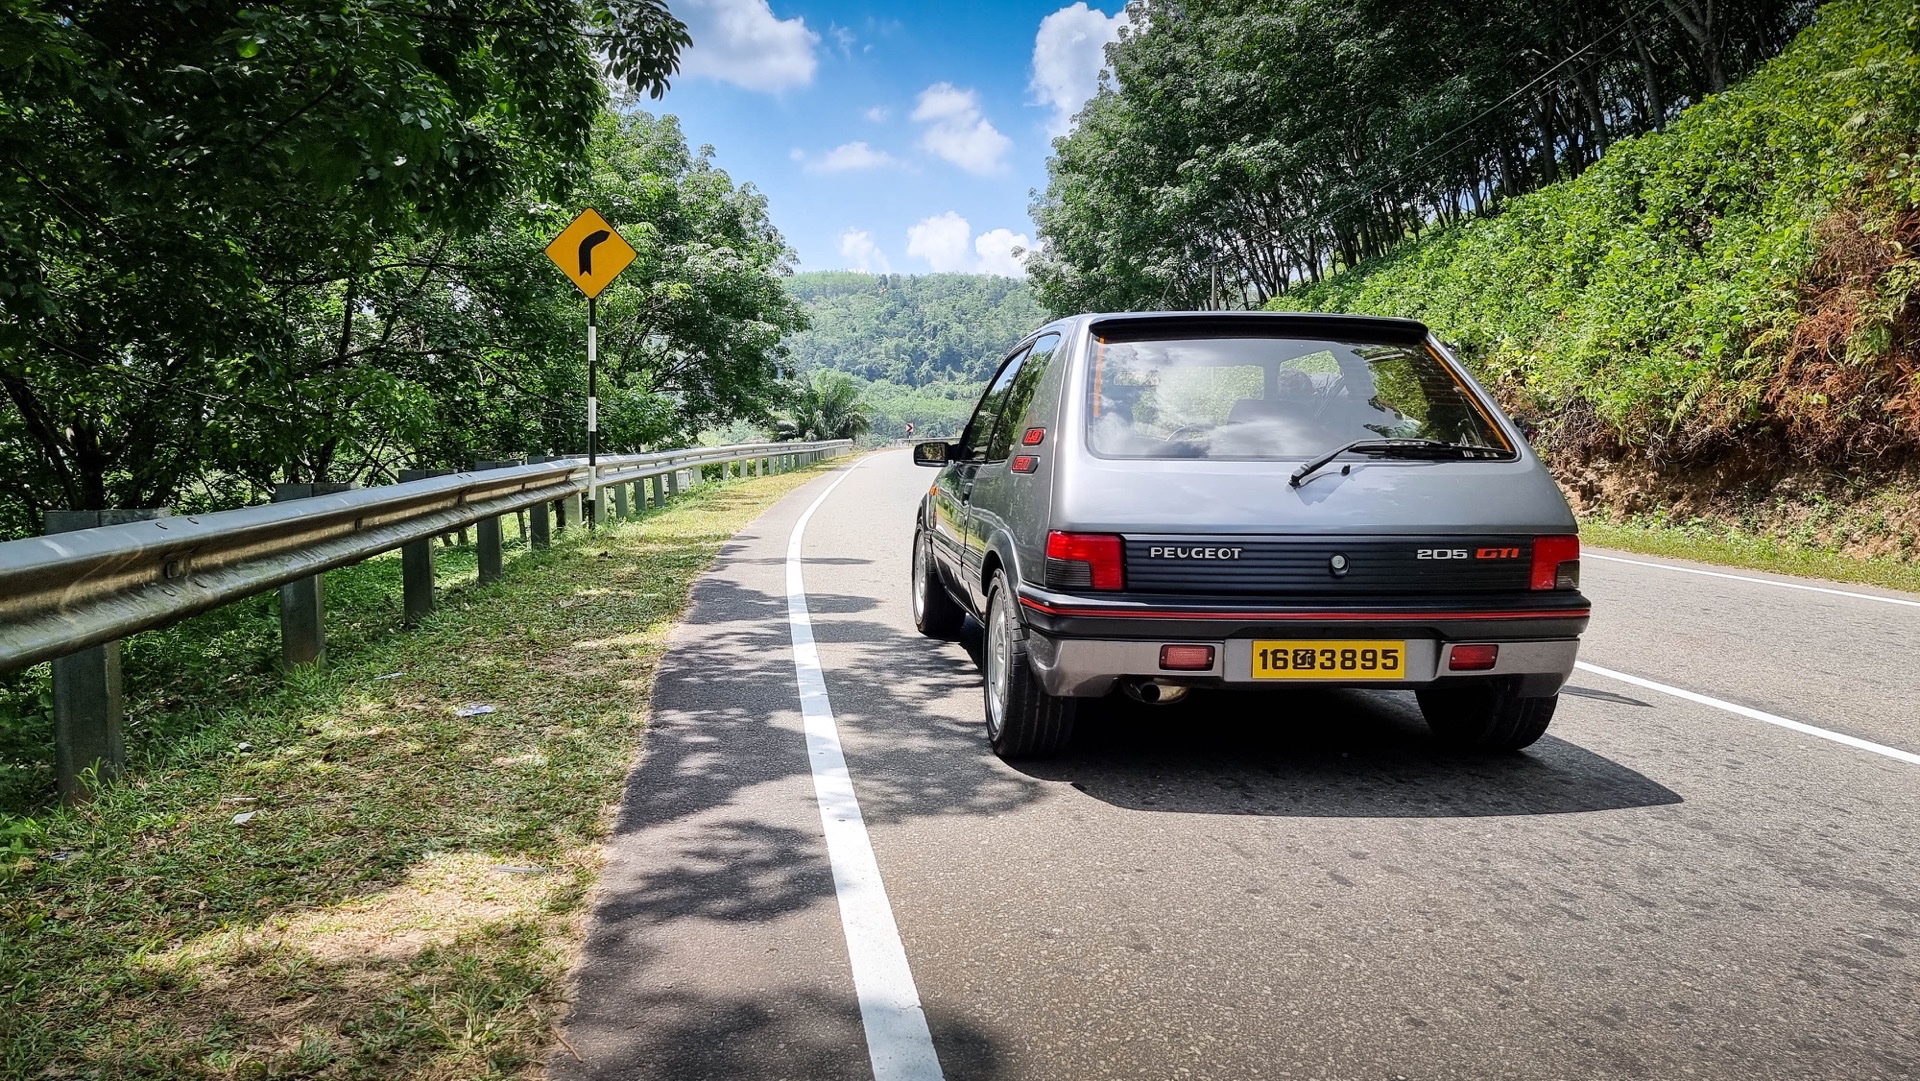 My Peugeot 205 GTI taught me how to drive